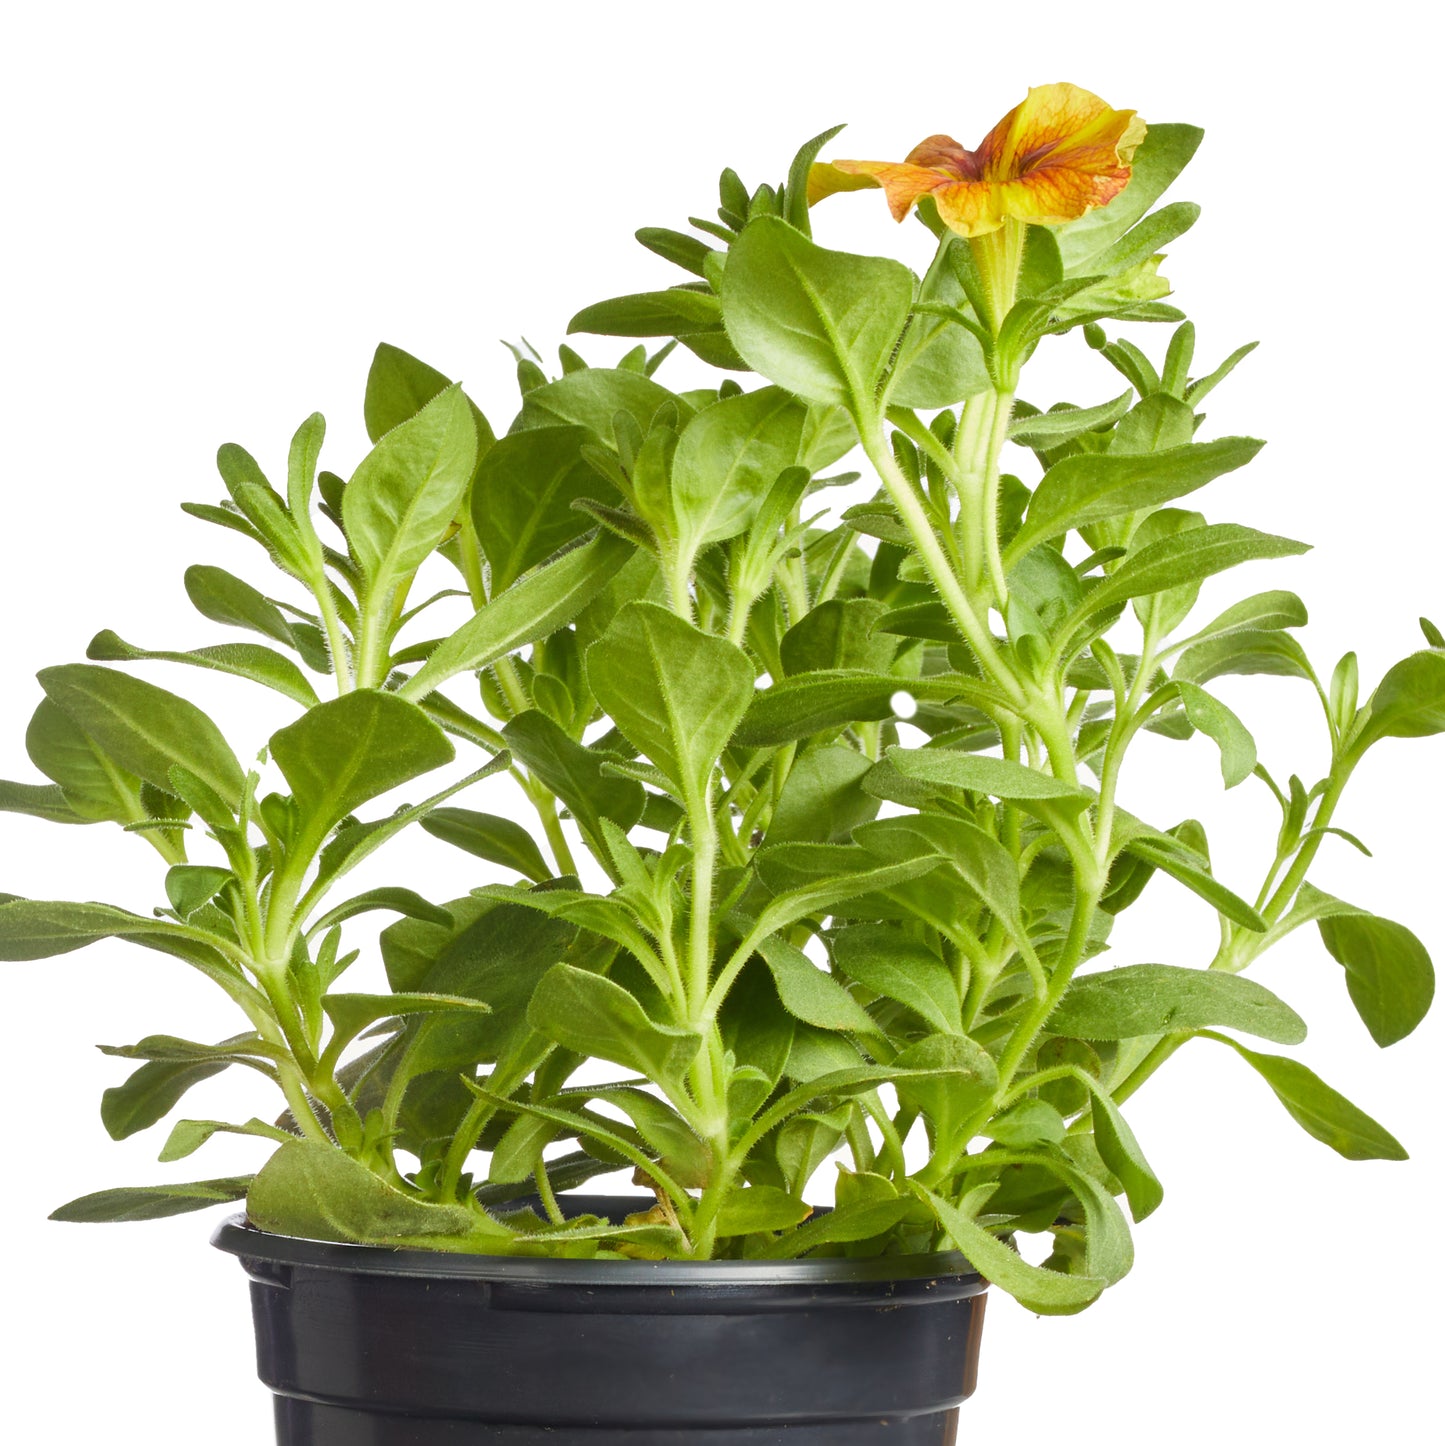 Petchoa SuperCal® Premium Caramel Yellow Plantlings Plus Live Baby Plants 4in. Pot, 2-Pack